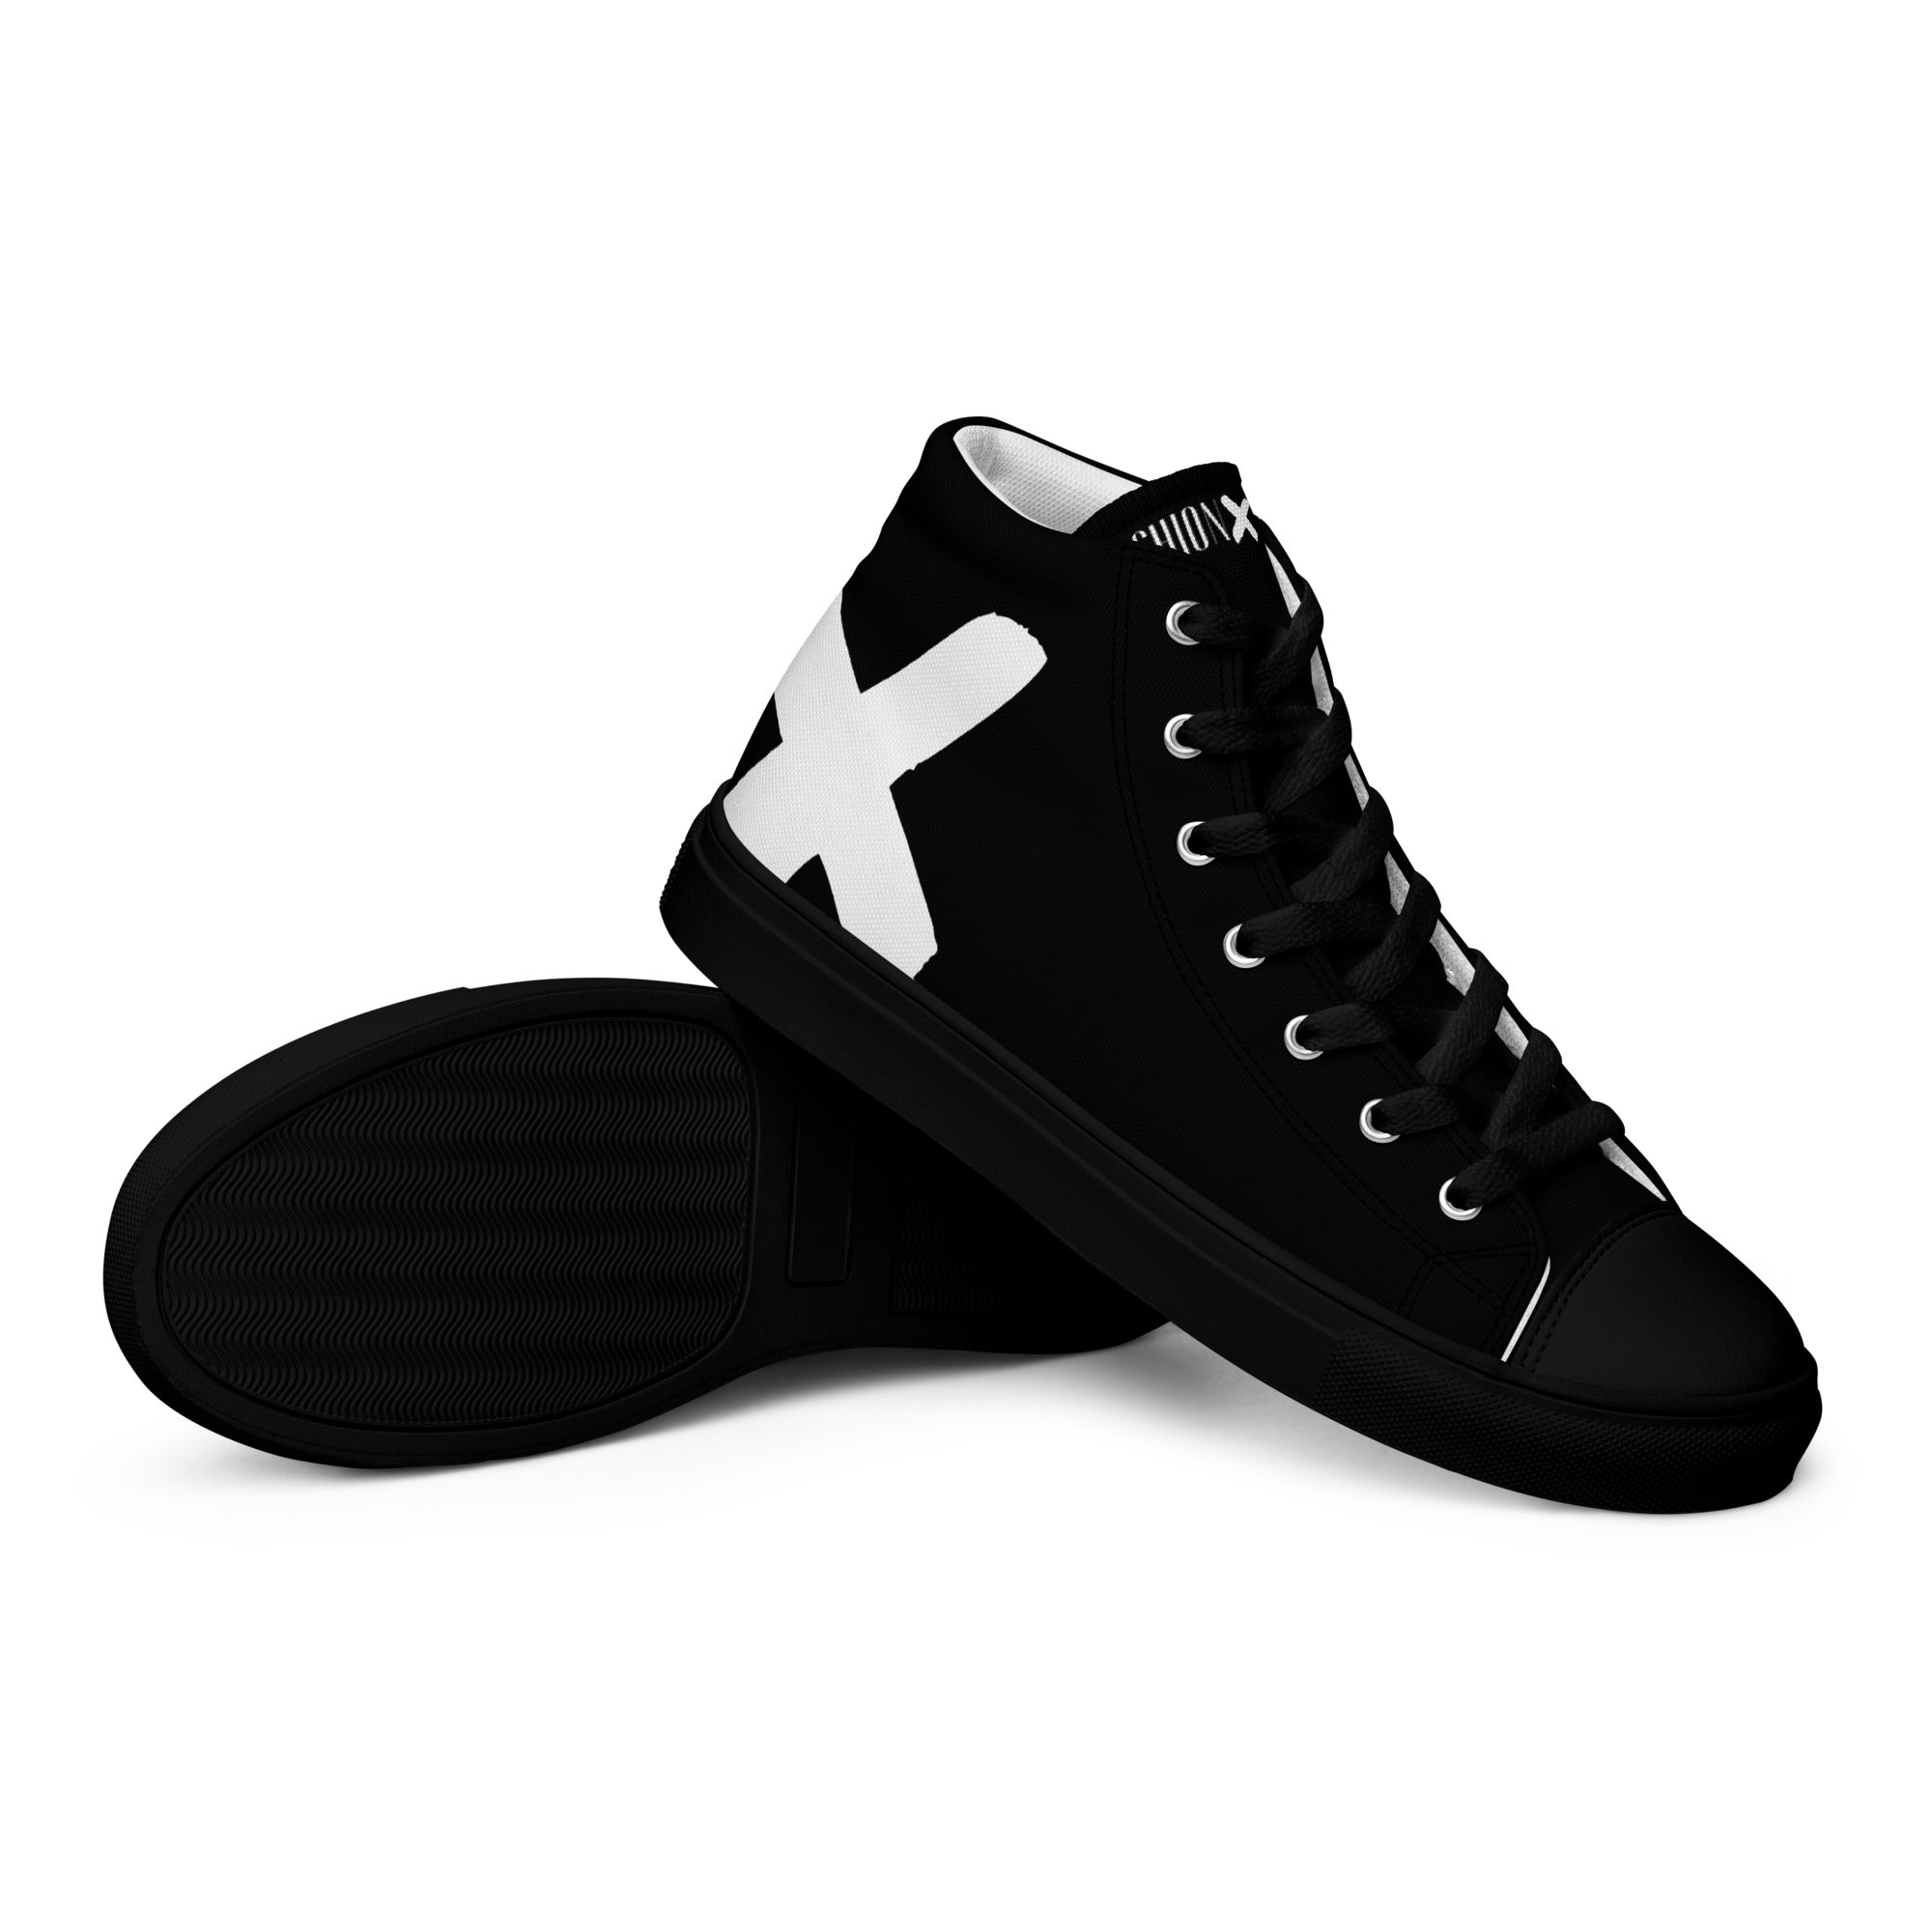 FASHION THERAPY men's high-top canvas sneakers